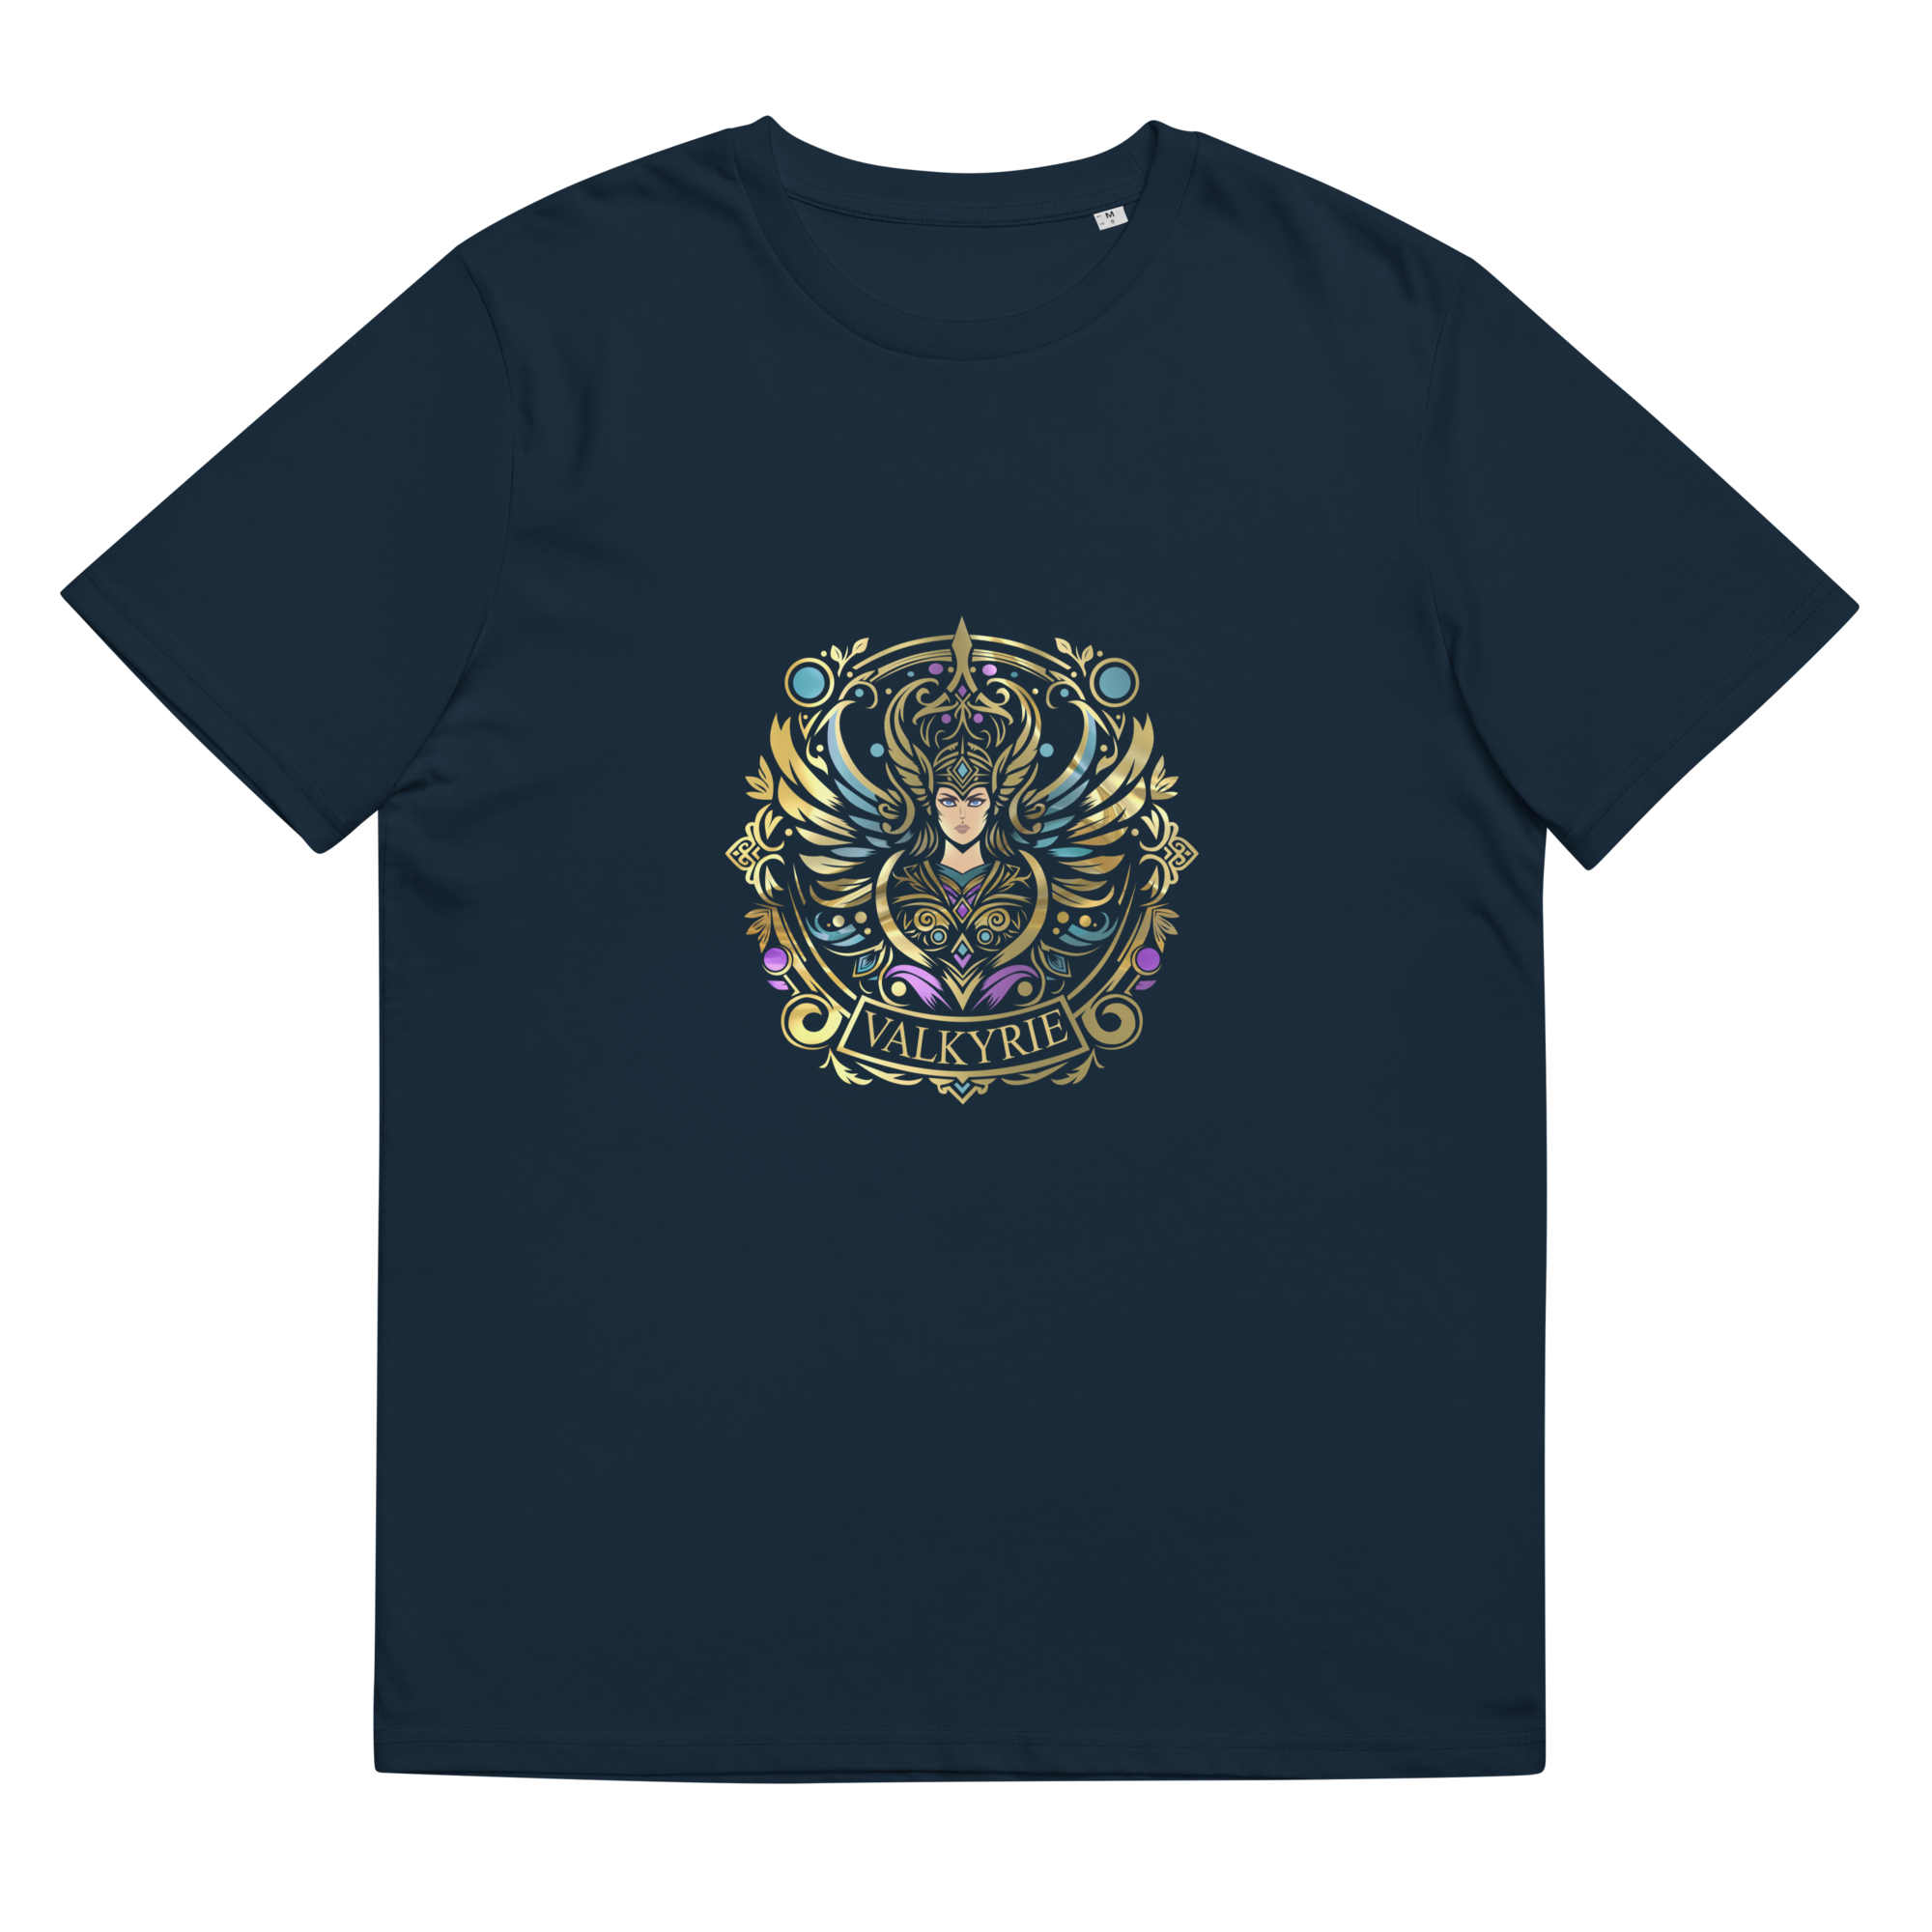 "Valkyrie's Gold" tee